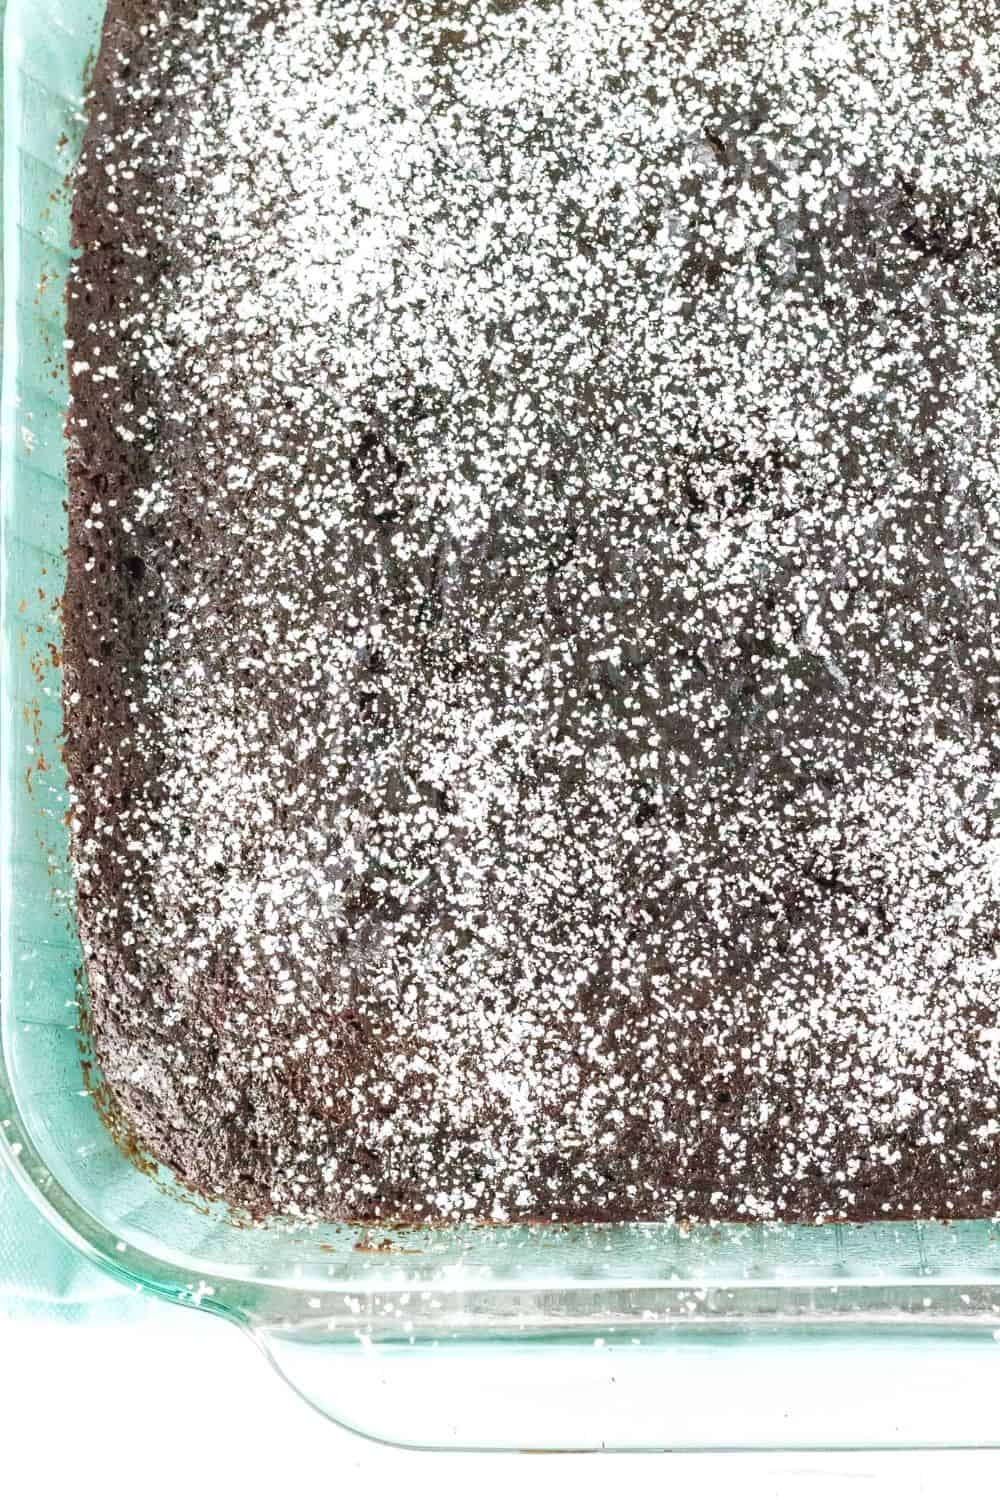 overhead view of a chocolate cake baked in a square pan and dusted with powdered sugar